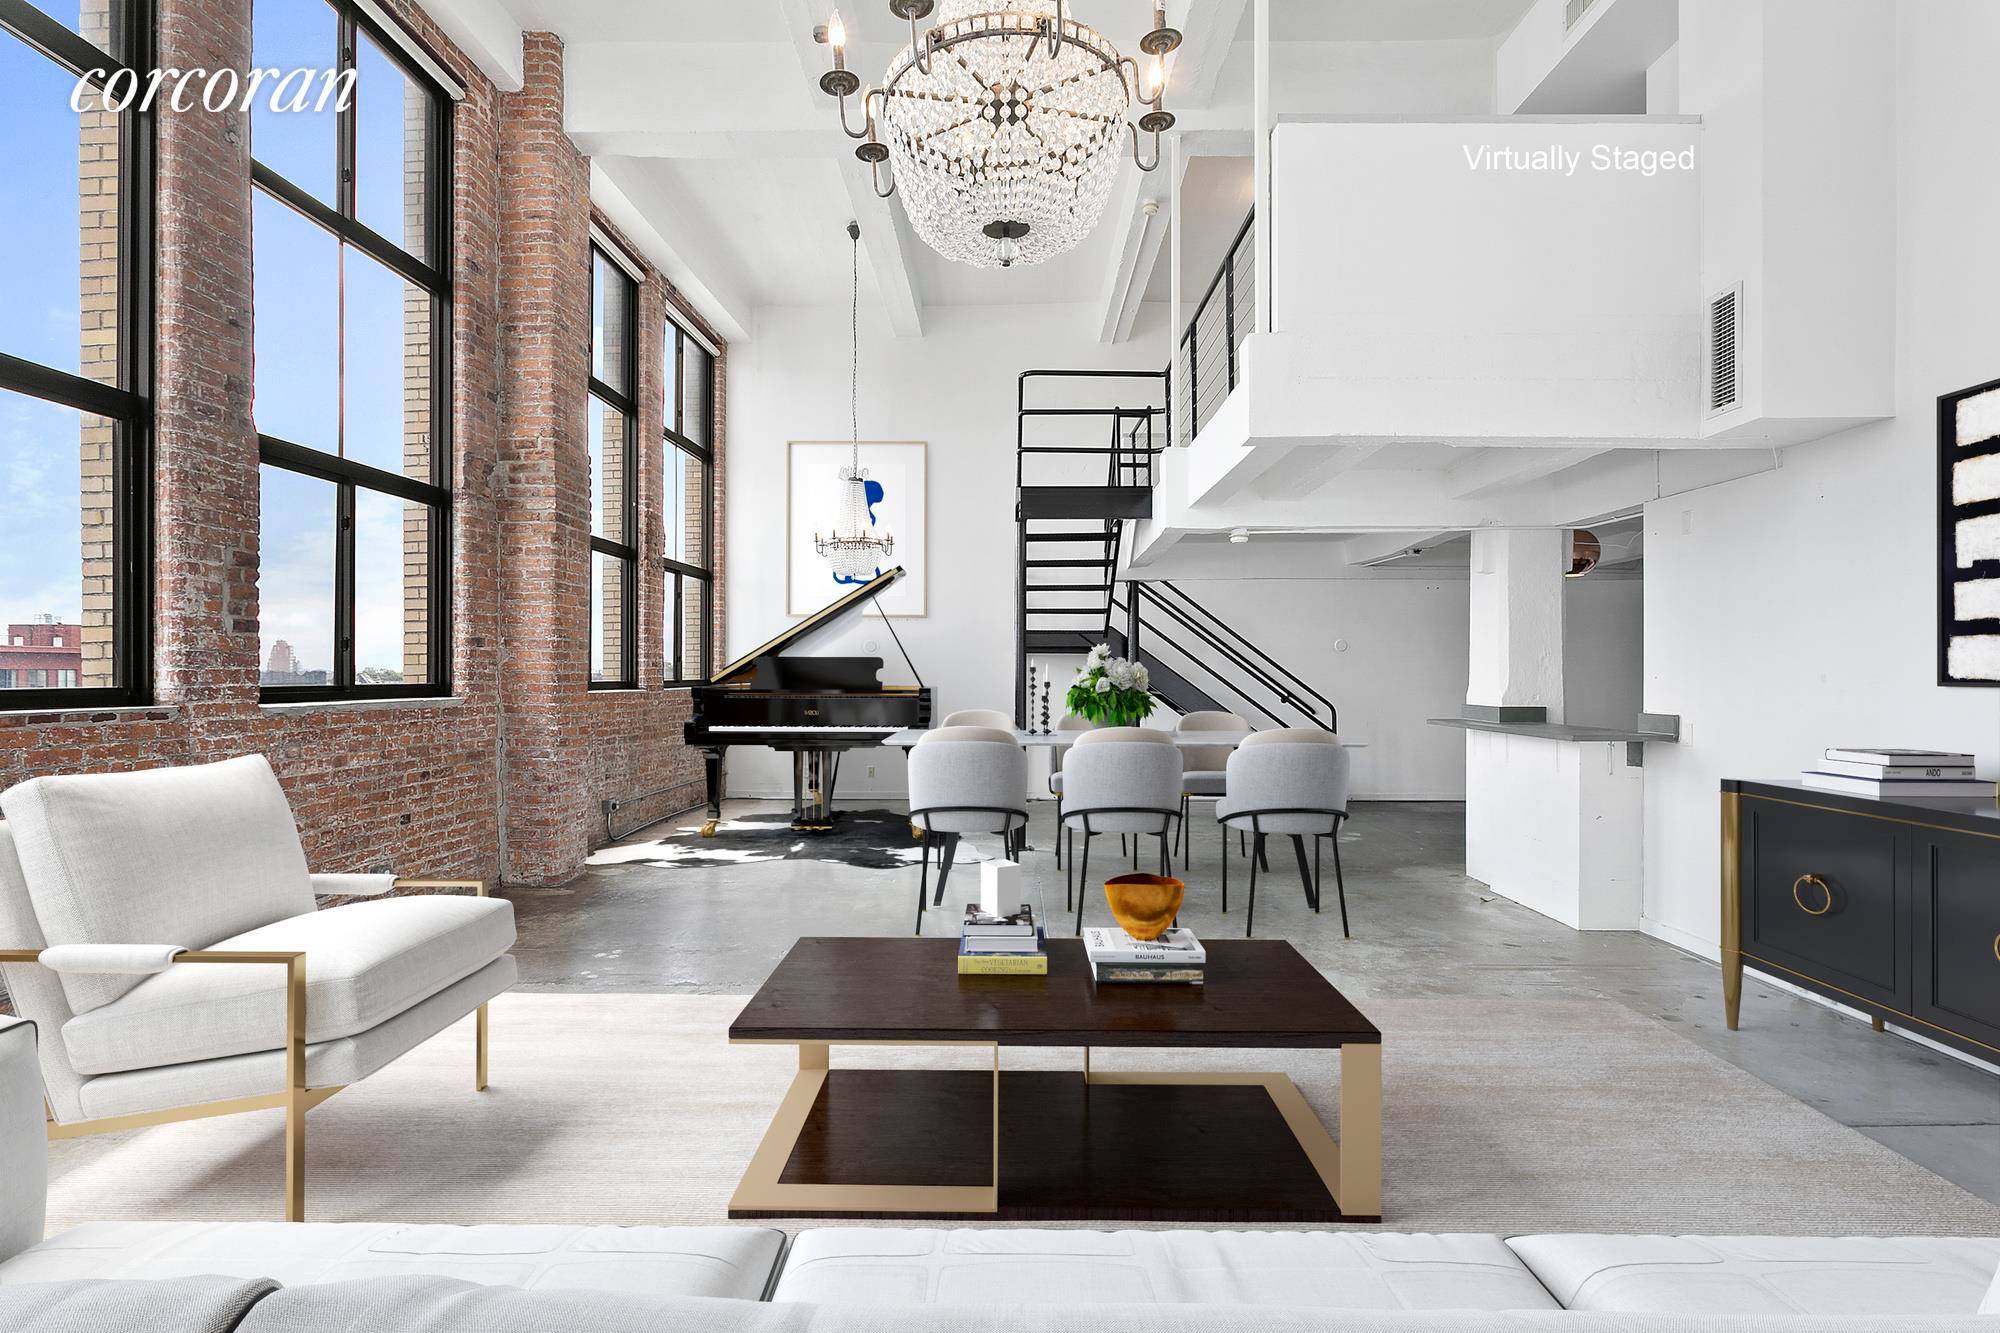 SHOWING BY APPOINTMENT IN ADVANCE WED, 7 29 from 2 30 3 30PMWelcome home to true LOFT living on the Williamsburg Waterfront at 330 Wythe Avenue The Esquire where no ...